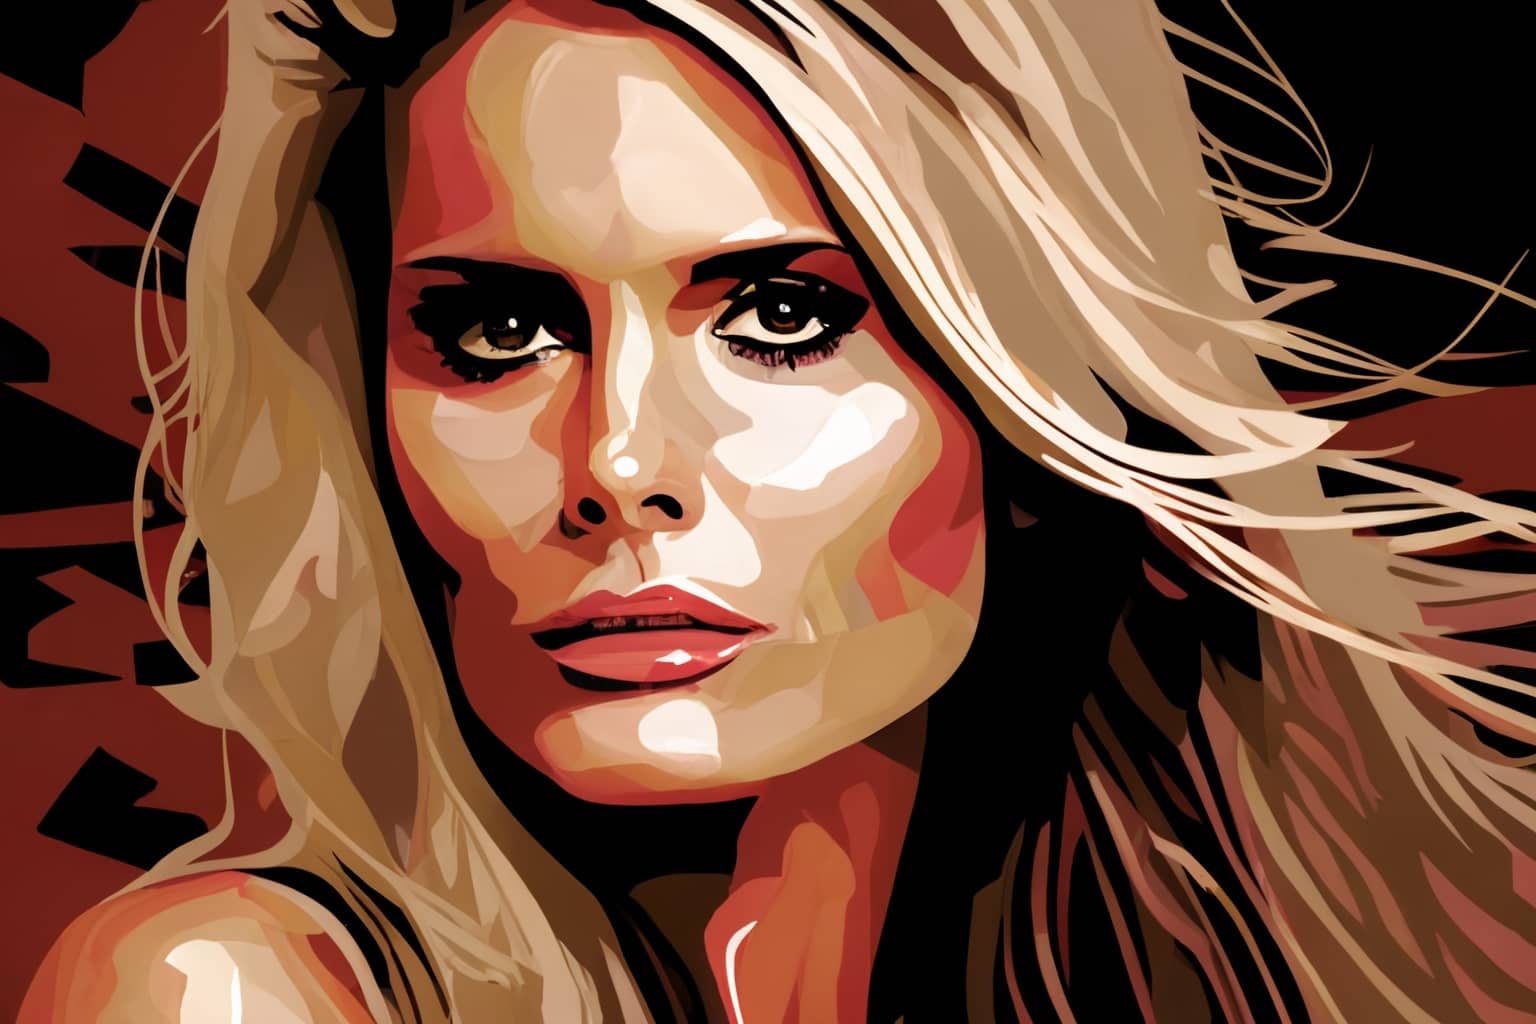 Heidi Klum Quote: “For me, life is about enjoying yourself because you only  live once. We should try to make the most of things and follow ”